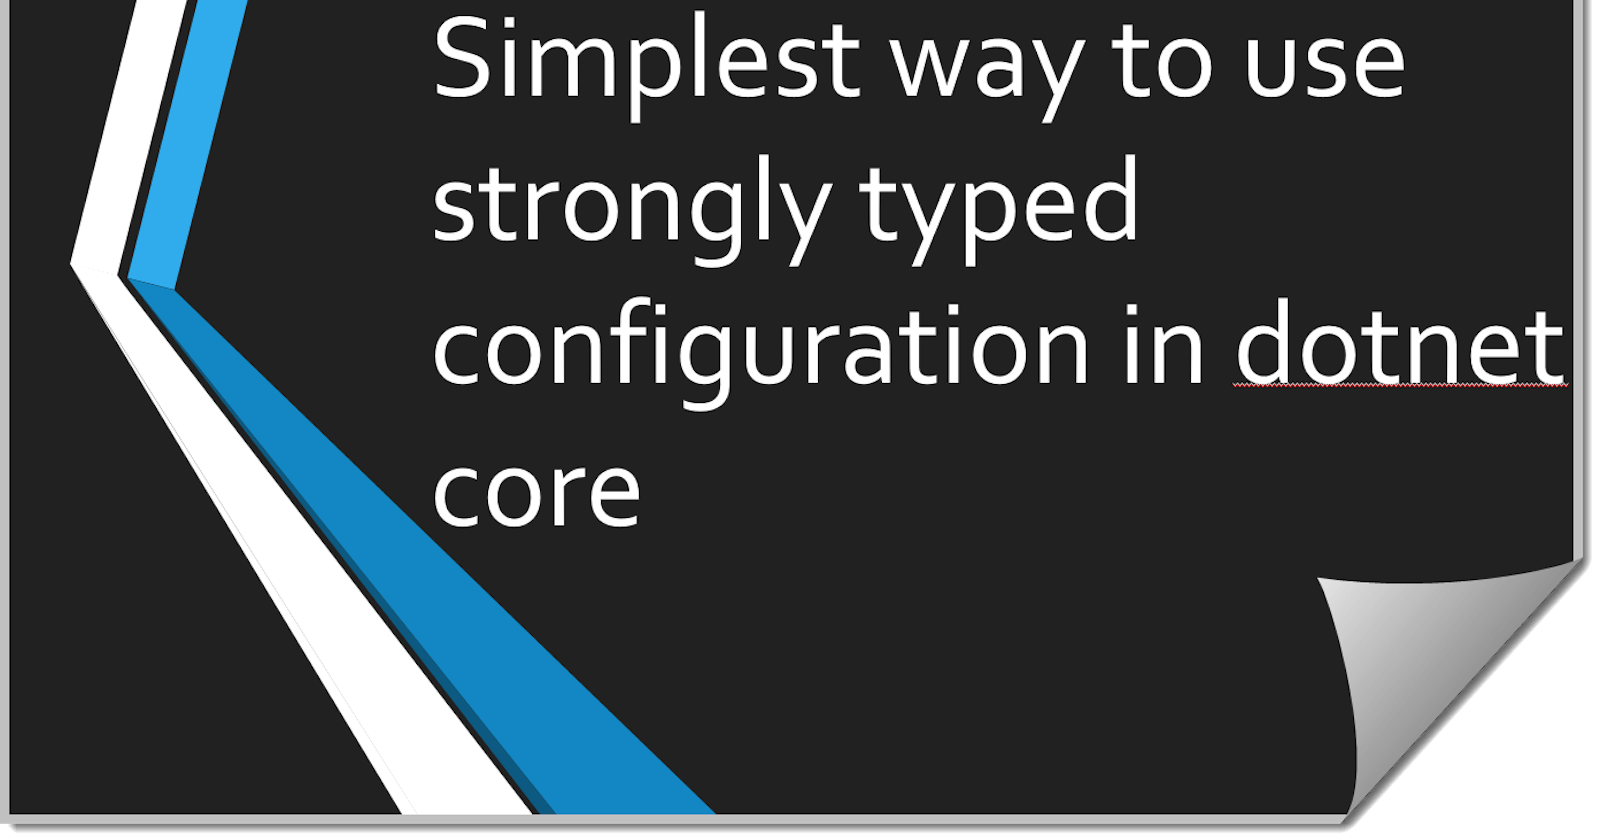 Simplest way to use strongly typed configuration in dotnet core